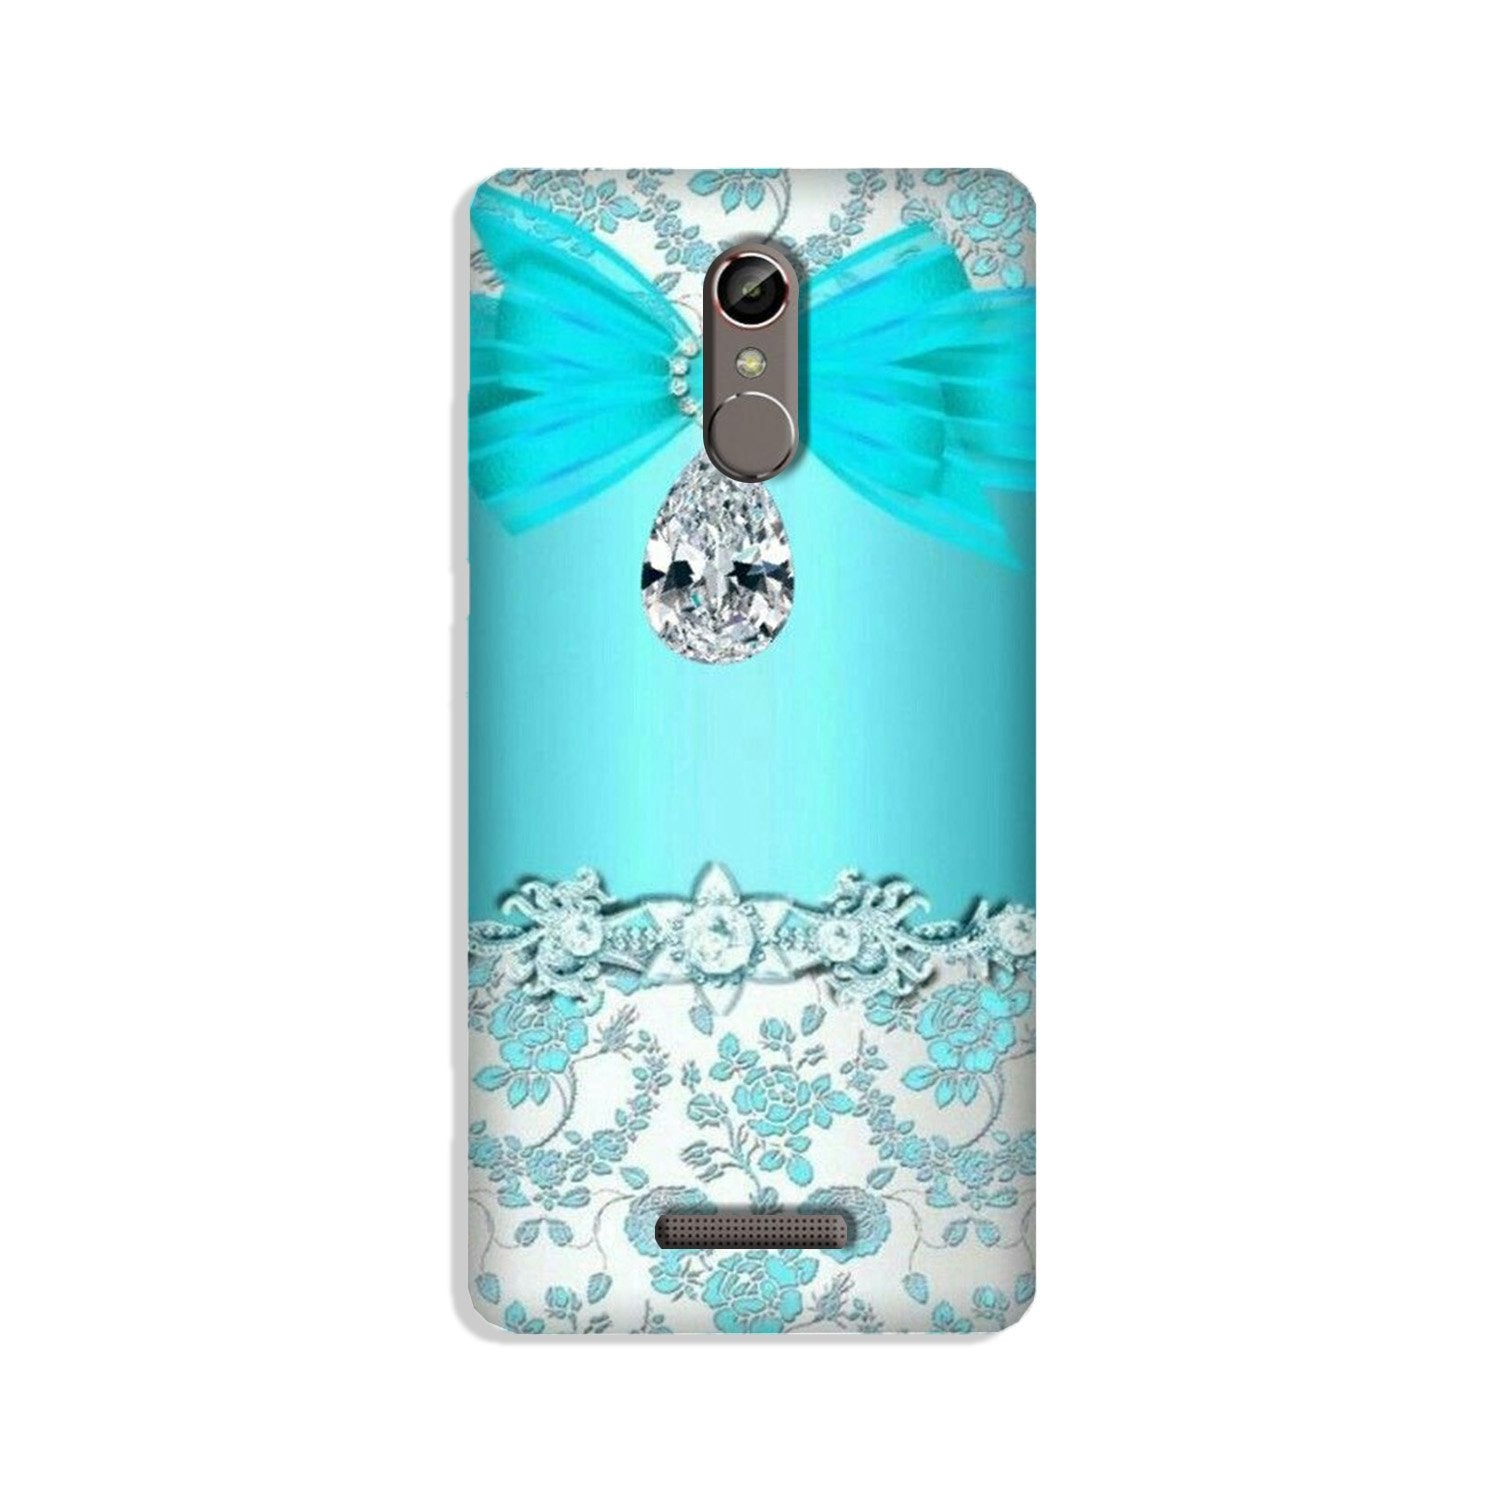 Shinny Blue Background Case for Gionee S6s